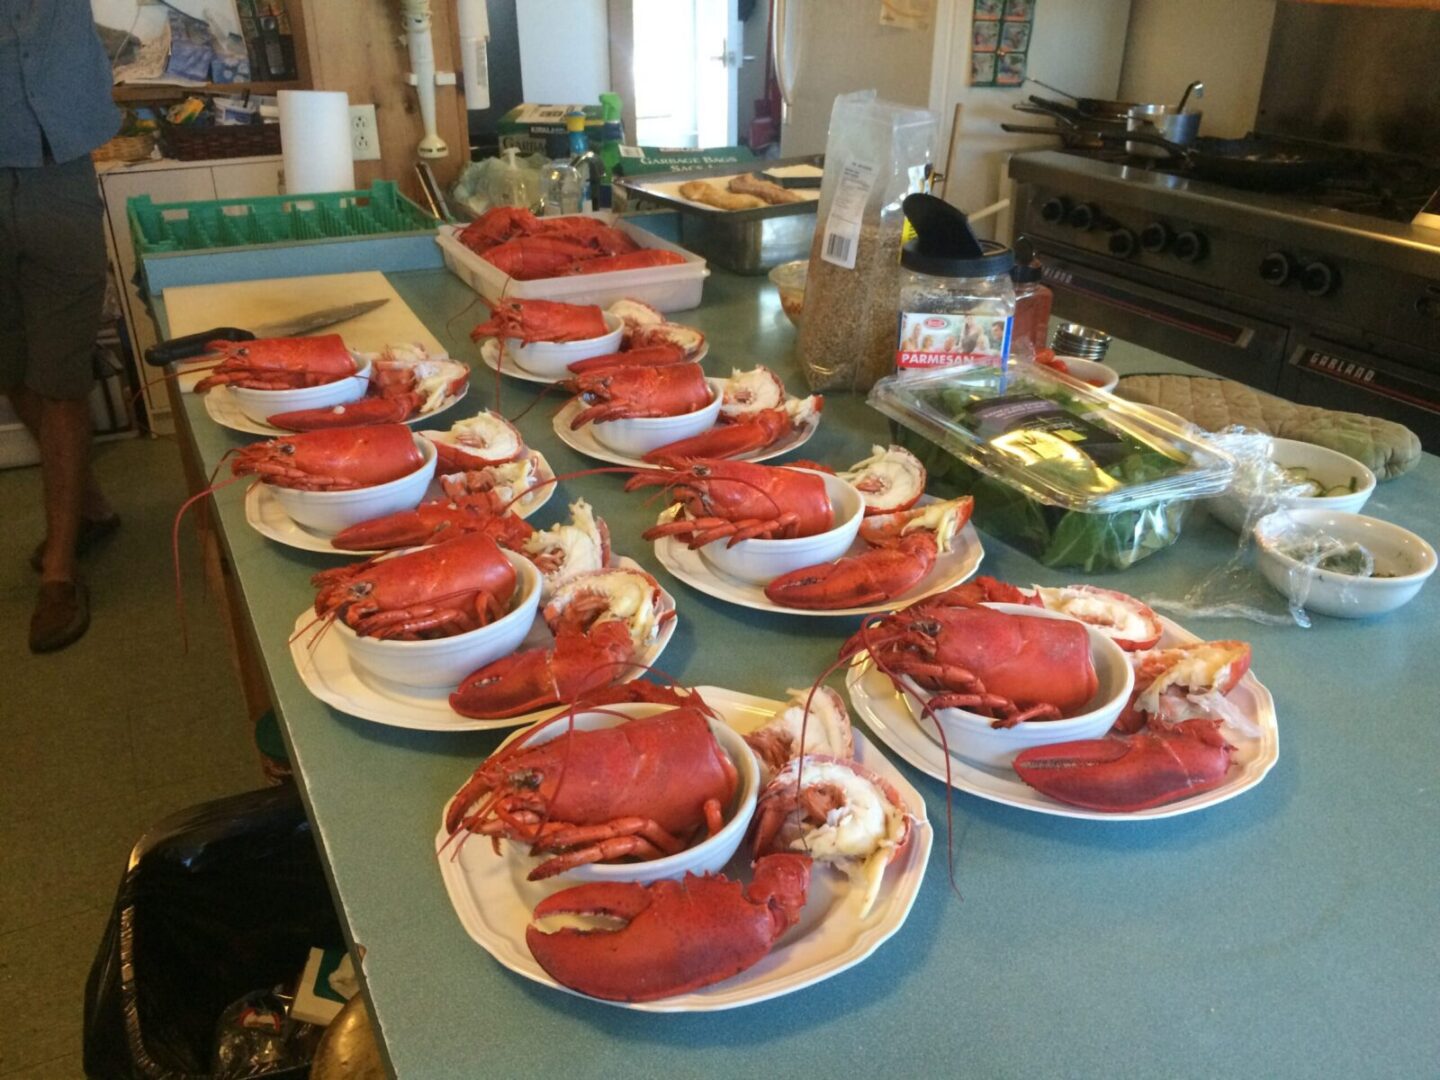 A kitchen with a table full of plates of lobsters.